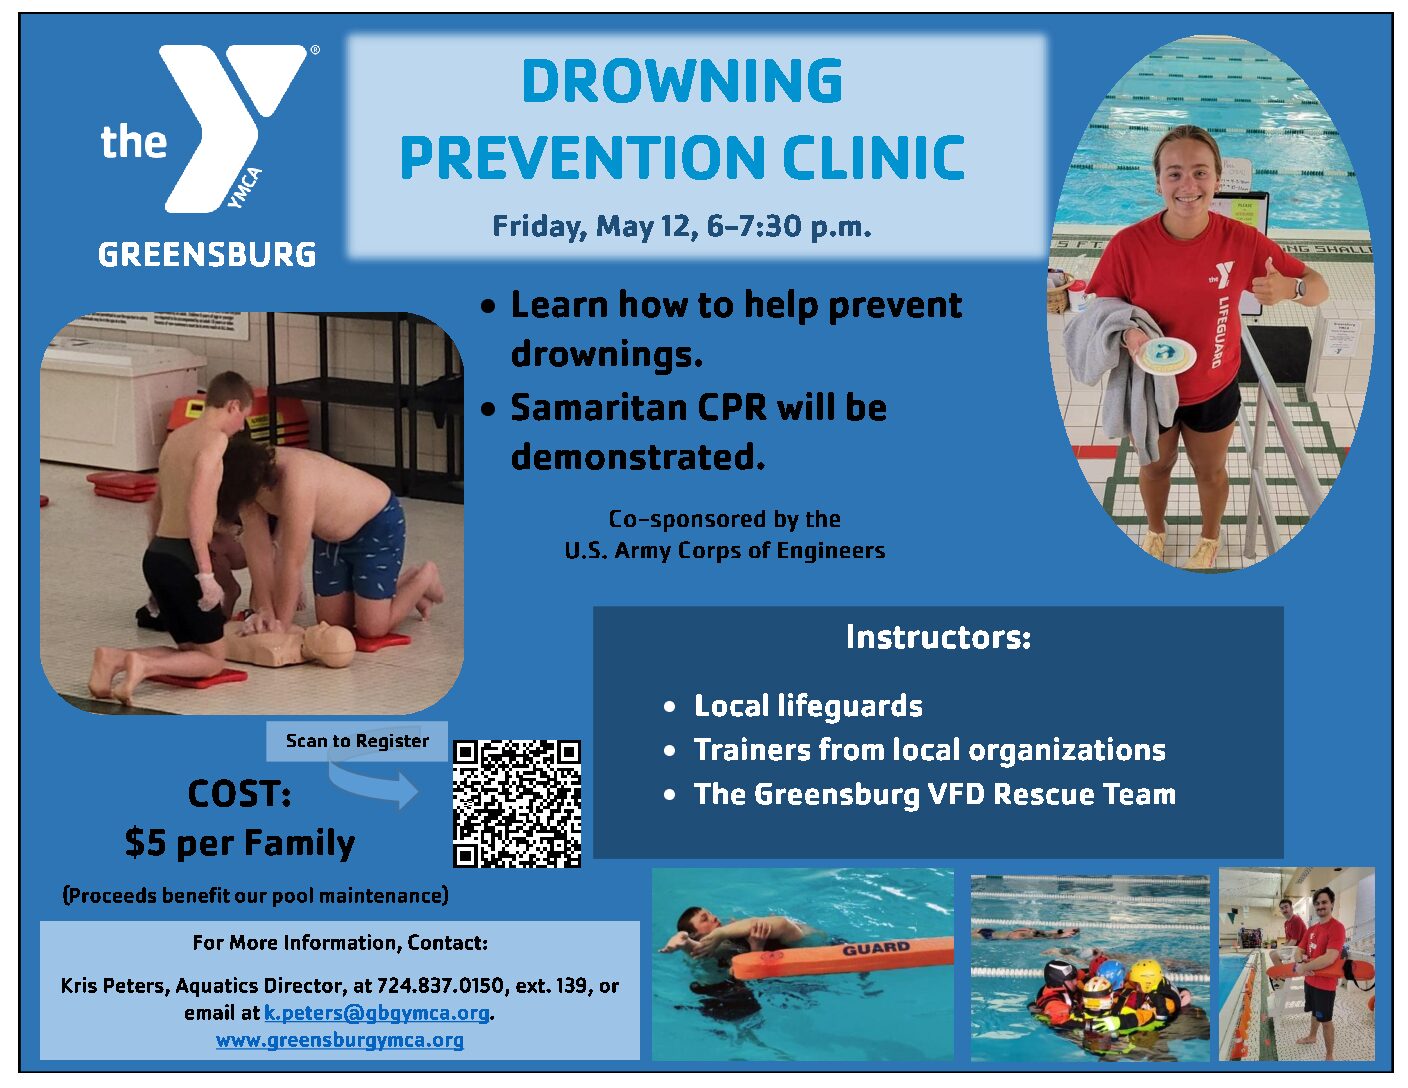 DROWNING PREVENTION CLINIC